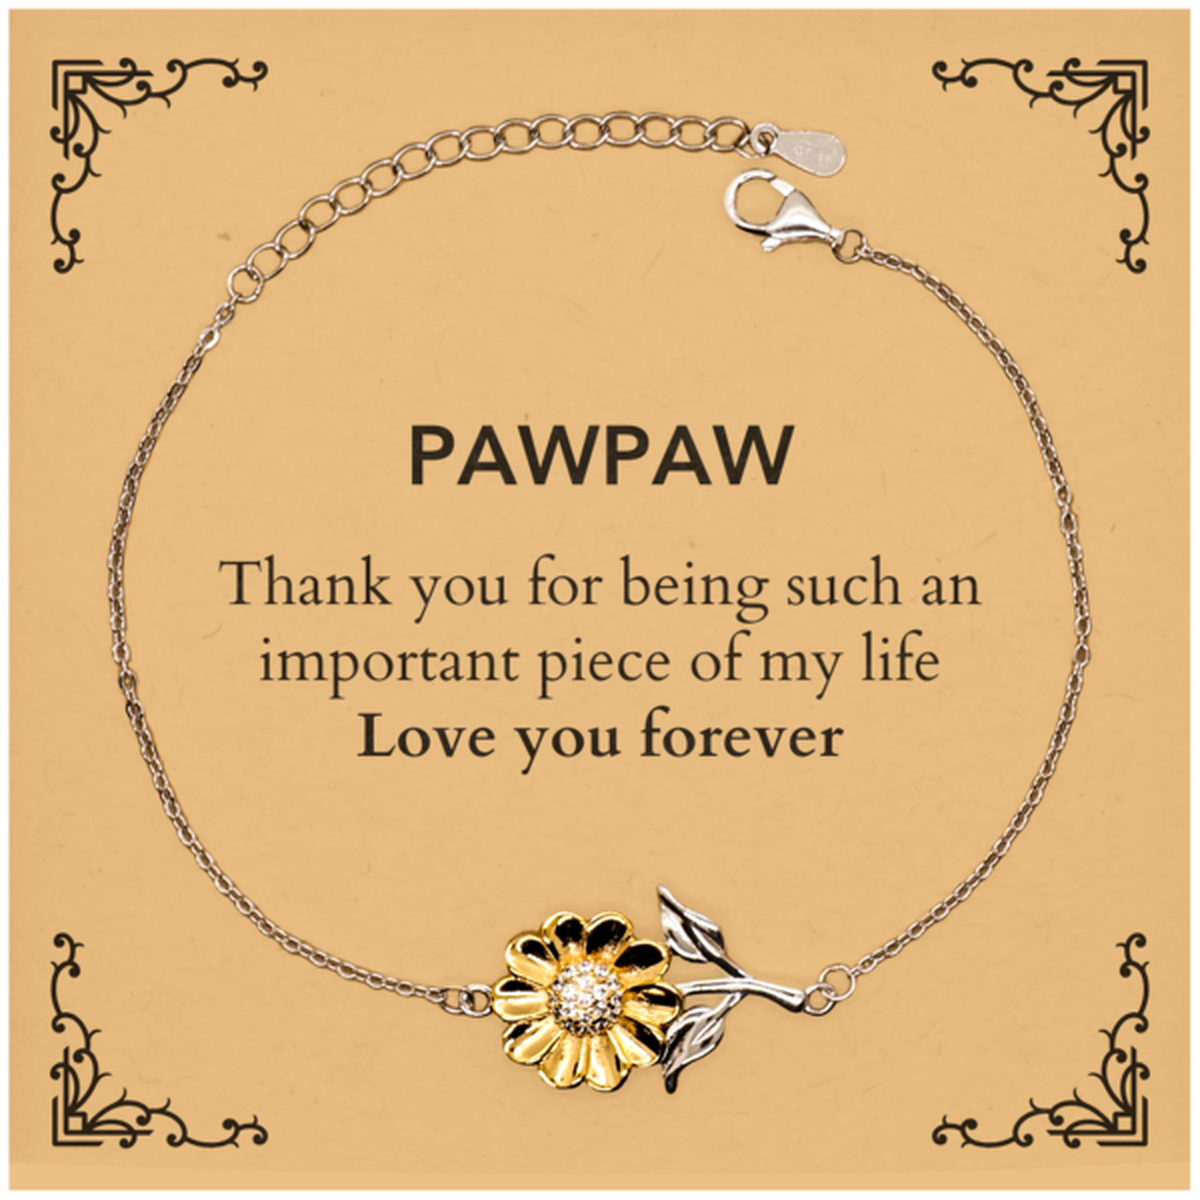 Appropriate Pawpaw Sunflower Bracelet Epic Birthday Gifts for Pawpaw Thank you for being such an important piece of my life Pawpaw Christmas Mothers Fathers Day